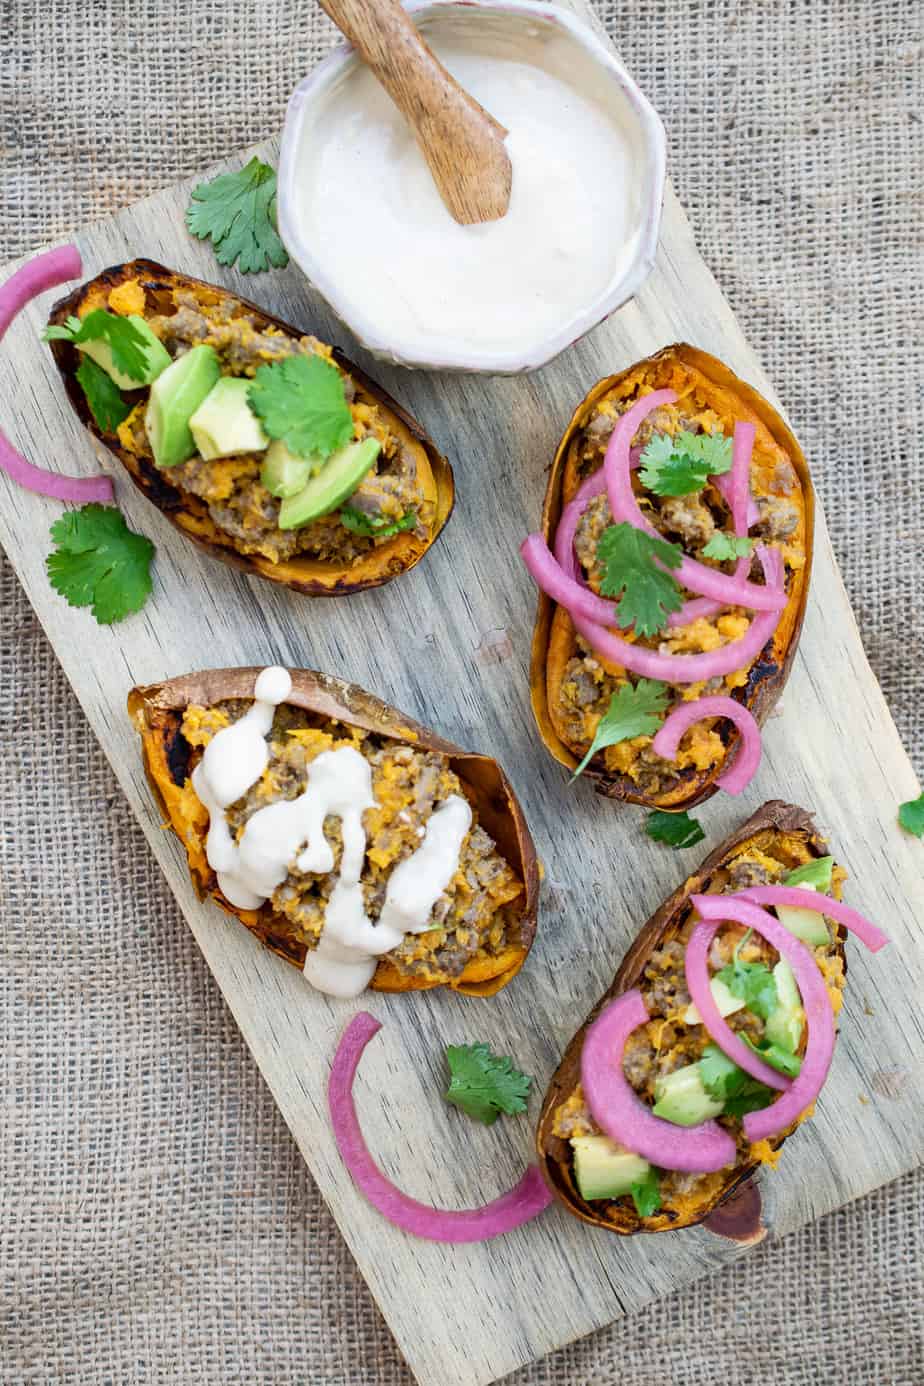 shot of final dish. four stuffed sweet potato skins. two garnished with cilantro and pickled red onion. one garnished with sauce. one garnished with cilantro and avocado. some cilantro and onion on the cutting board. cloth underneath cutting board. 